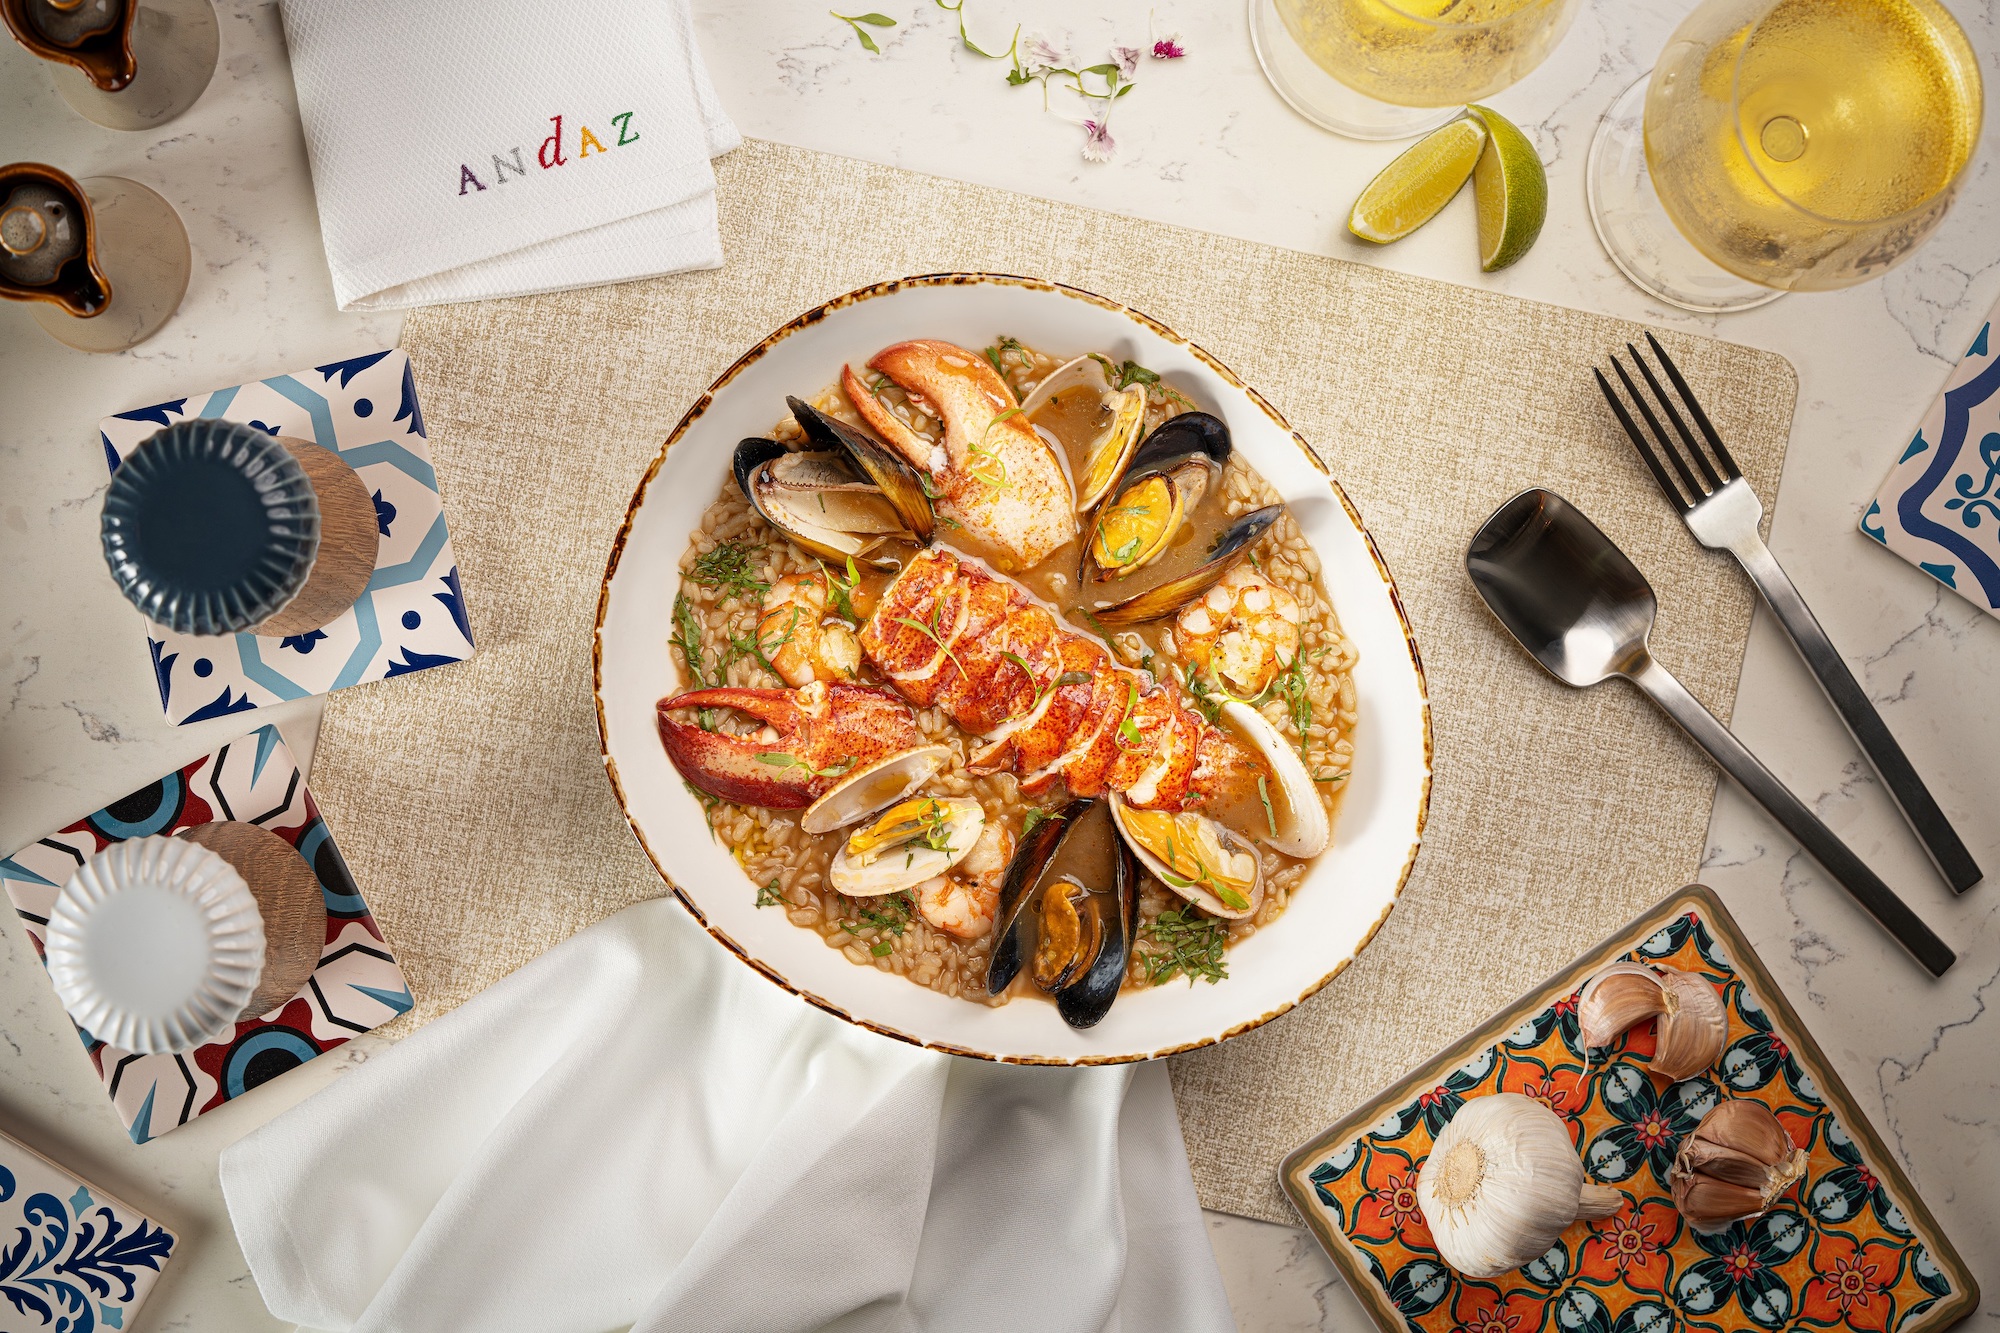 Portuguese Seafood Rice with Clams, Mussels, Prawns and Bos ton Lobster